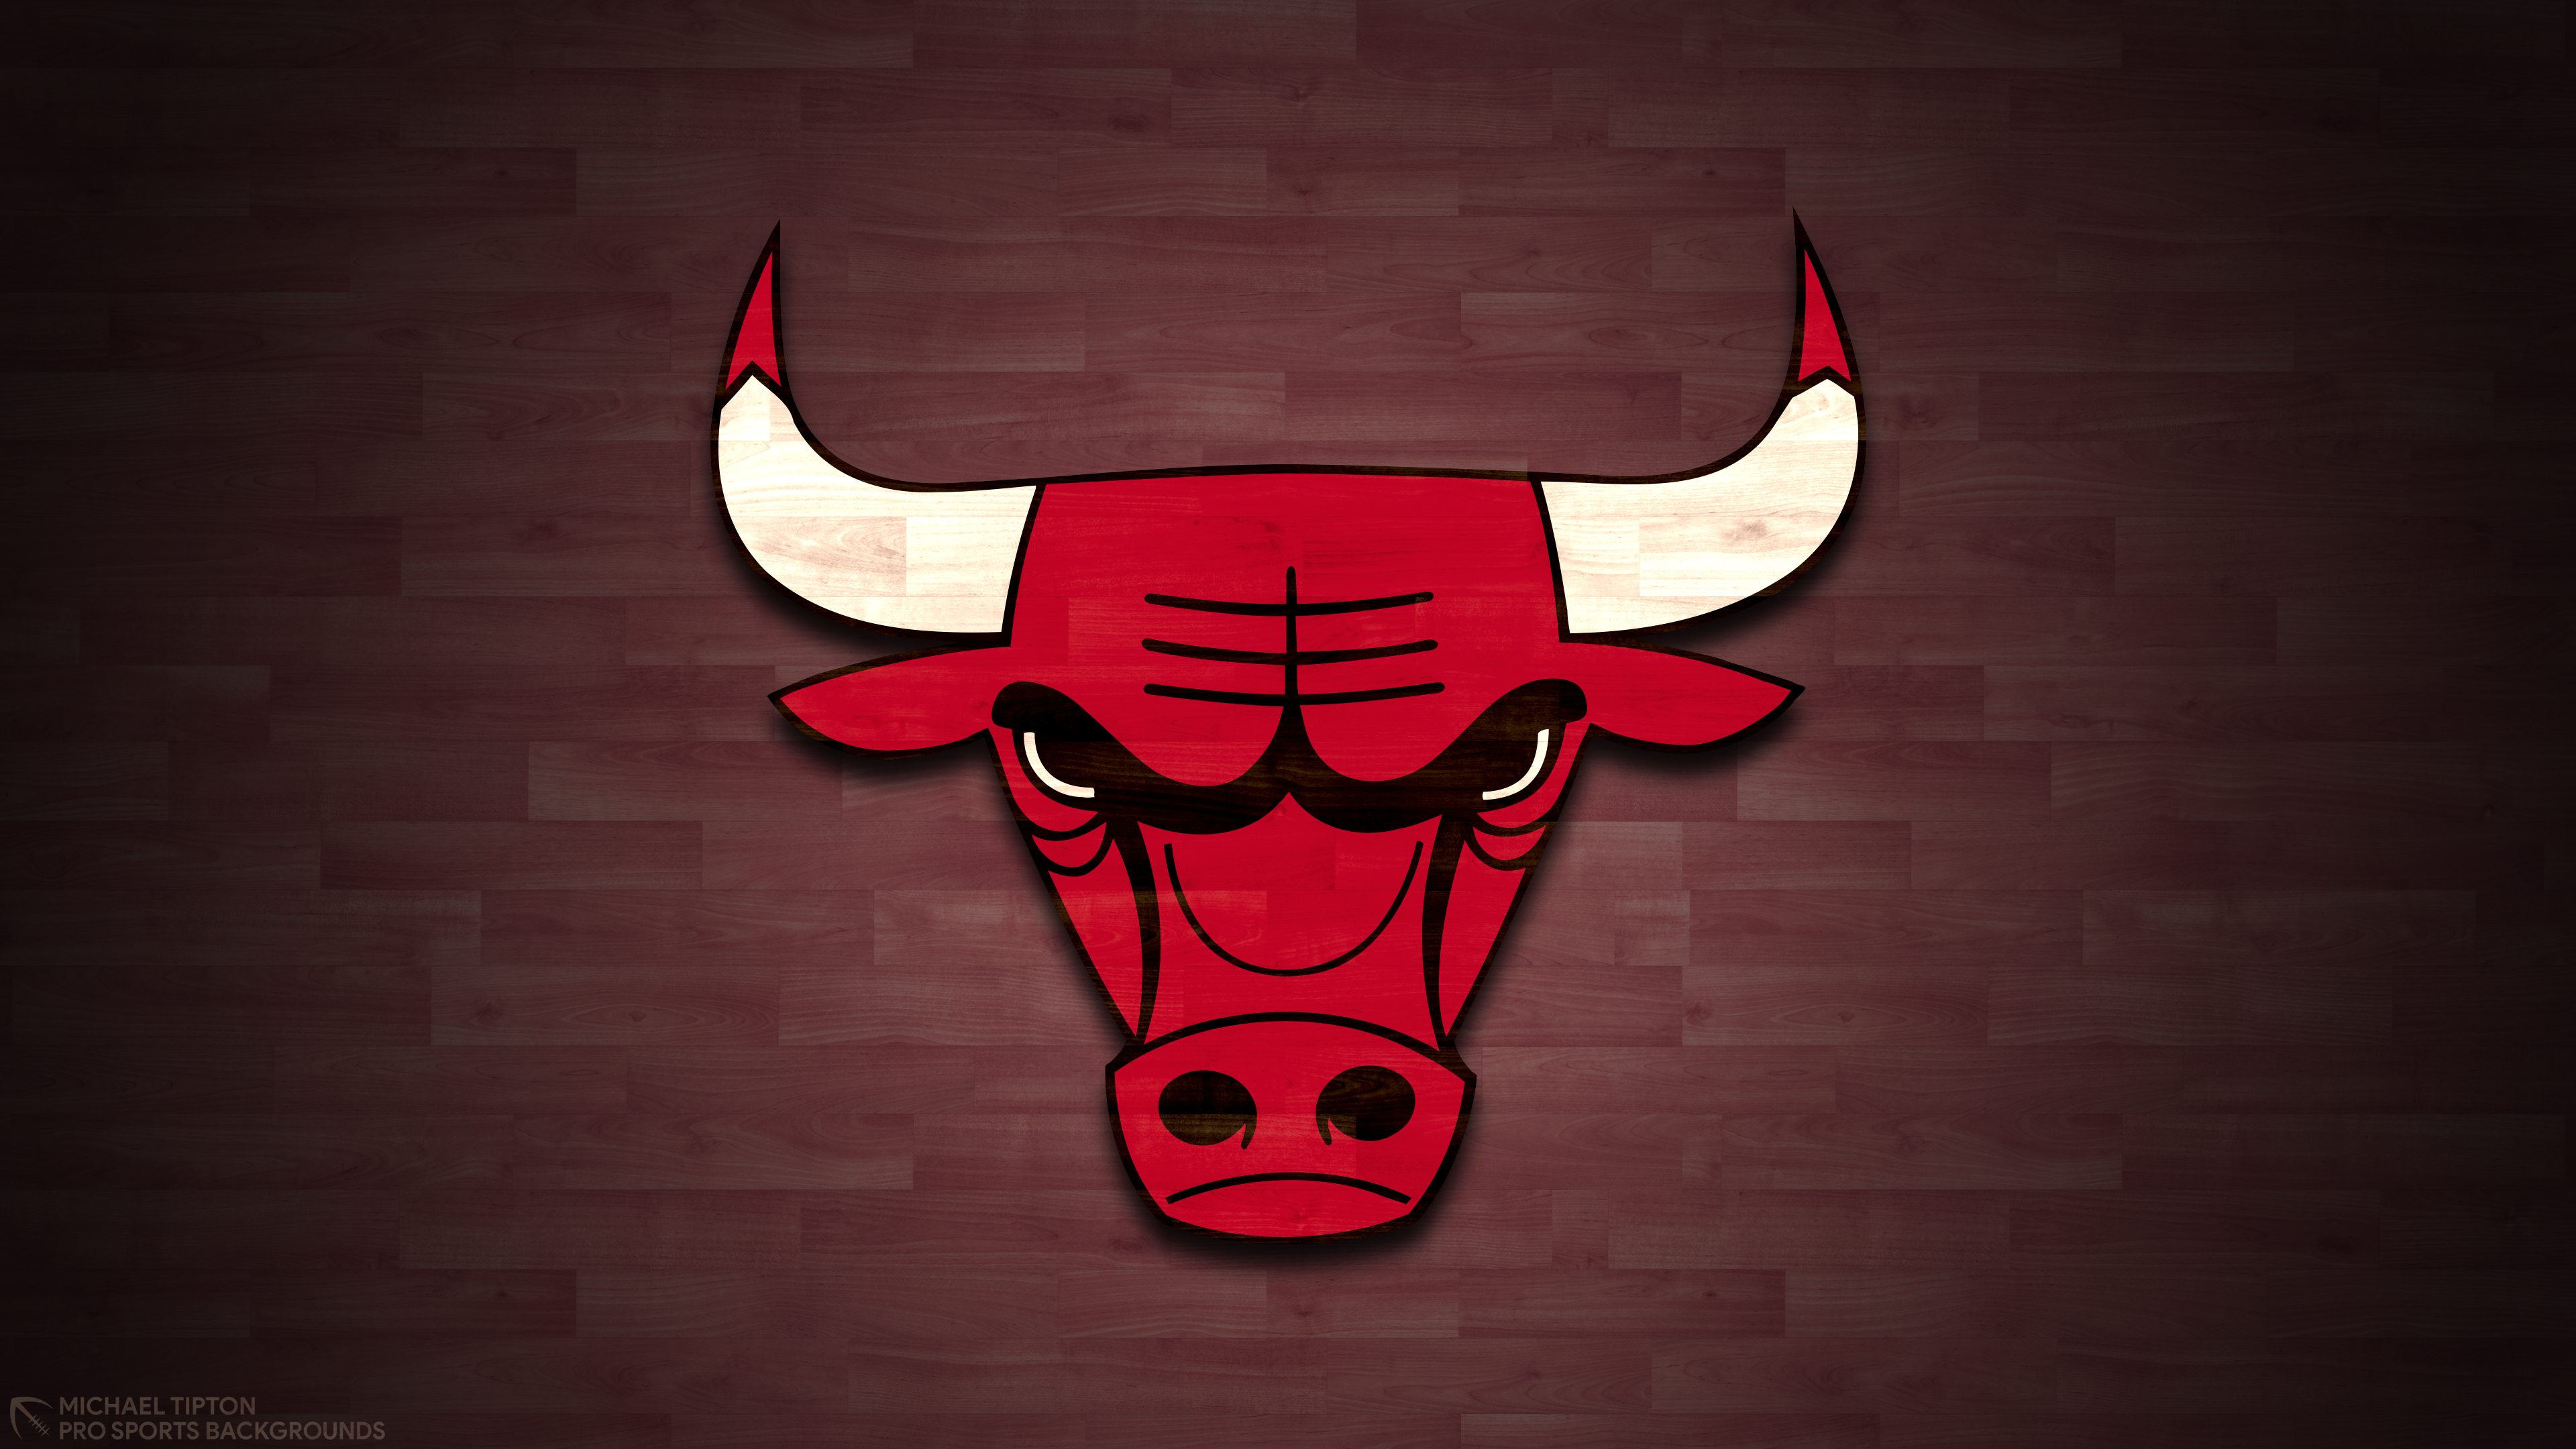 Chicago Bulls - GOAT wallpaper available now 👇